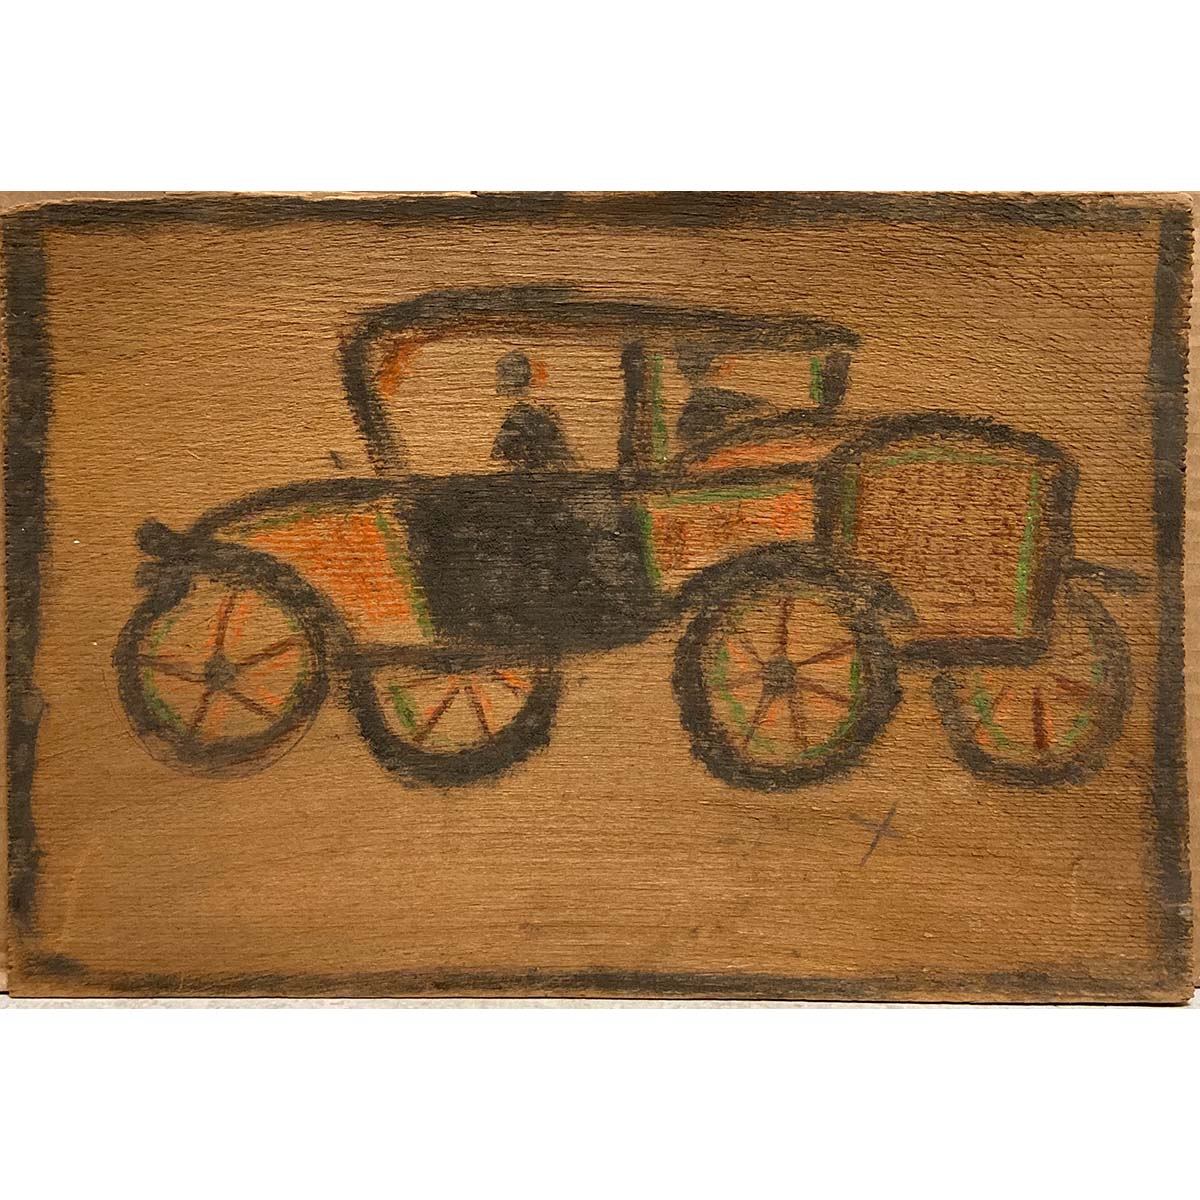 Old Car - Not Signed Jimmy Lee Sudduth